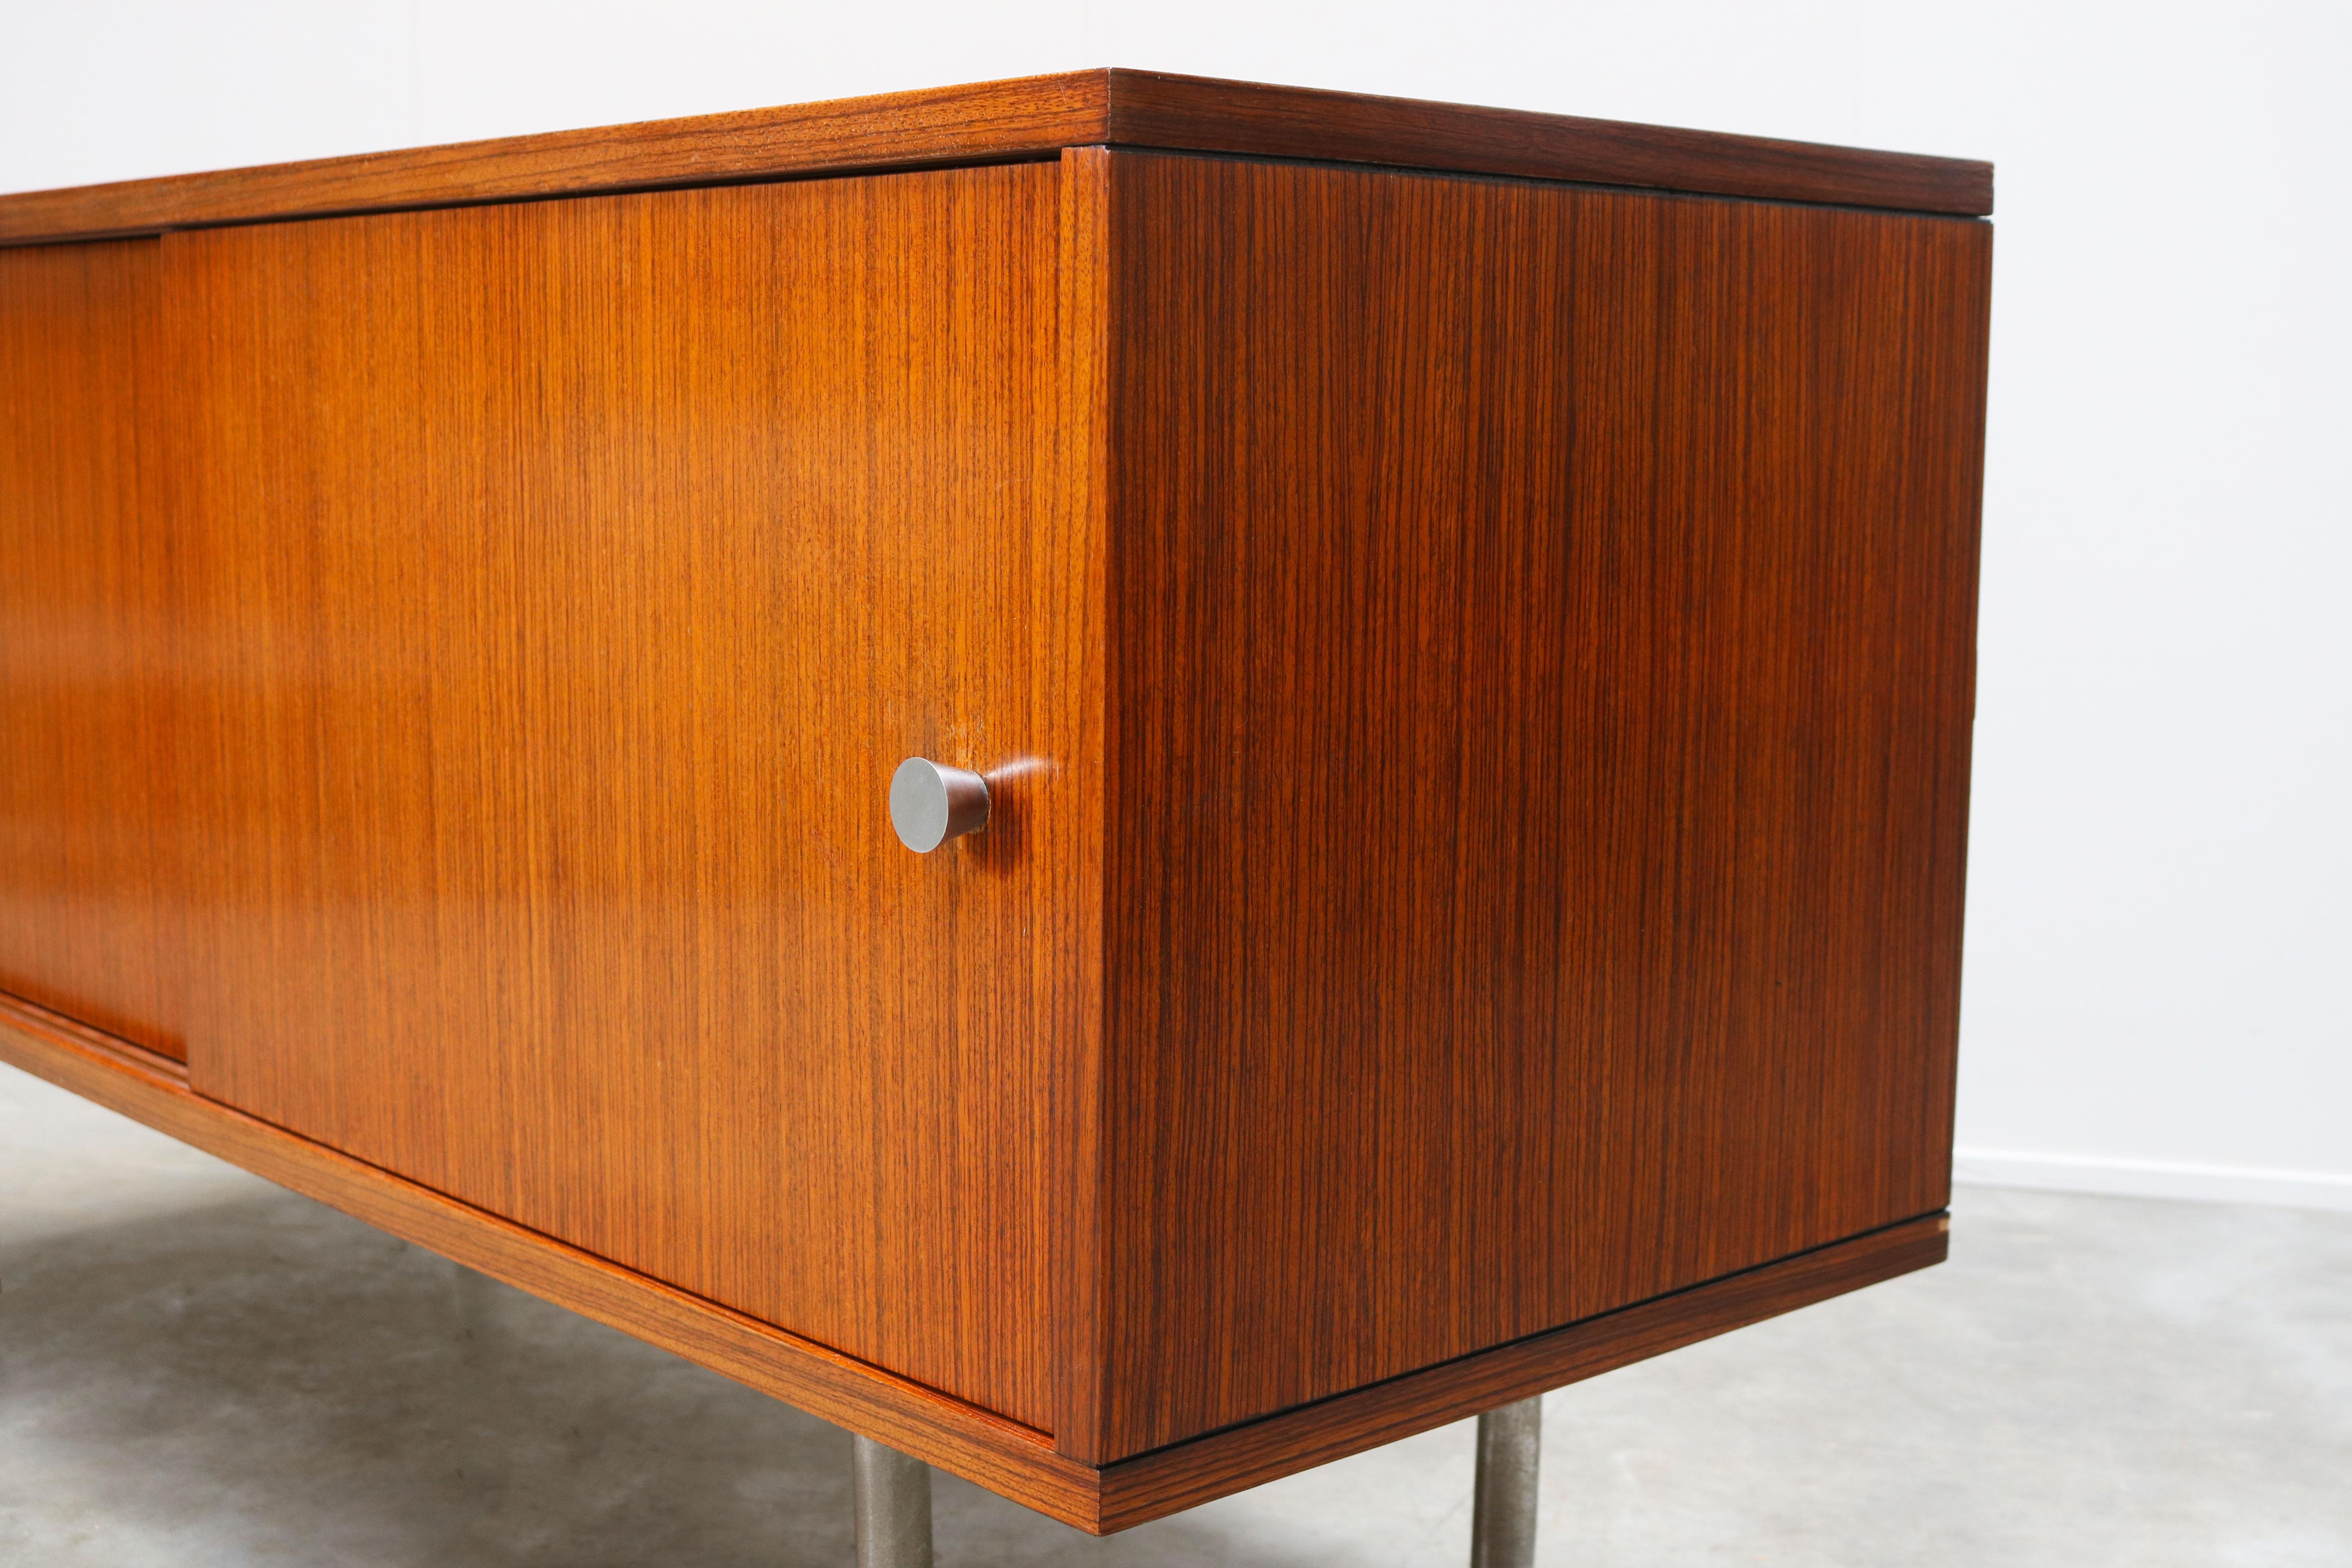 Minimalist modernist design sideboard / credenza by Belgian designer Alfred Hendrickx for Belform. This is a very rare small model of his Office series and looks amazing on the chrome feet. The sideboard has 2 sliding doors with aluminum grips and